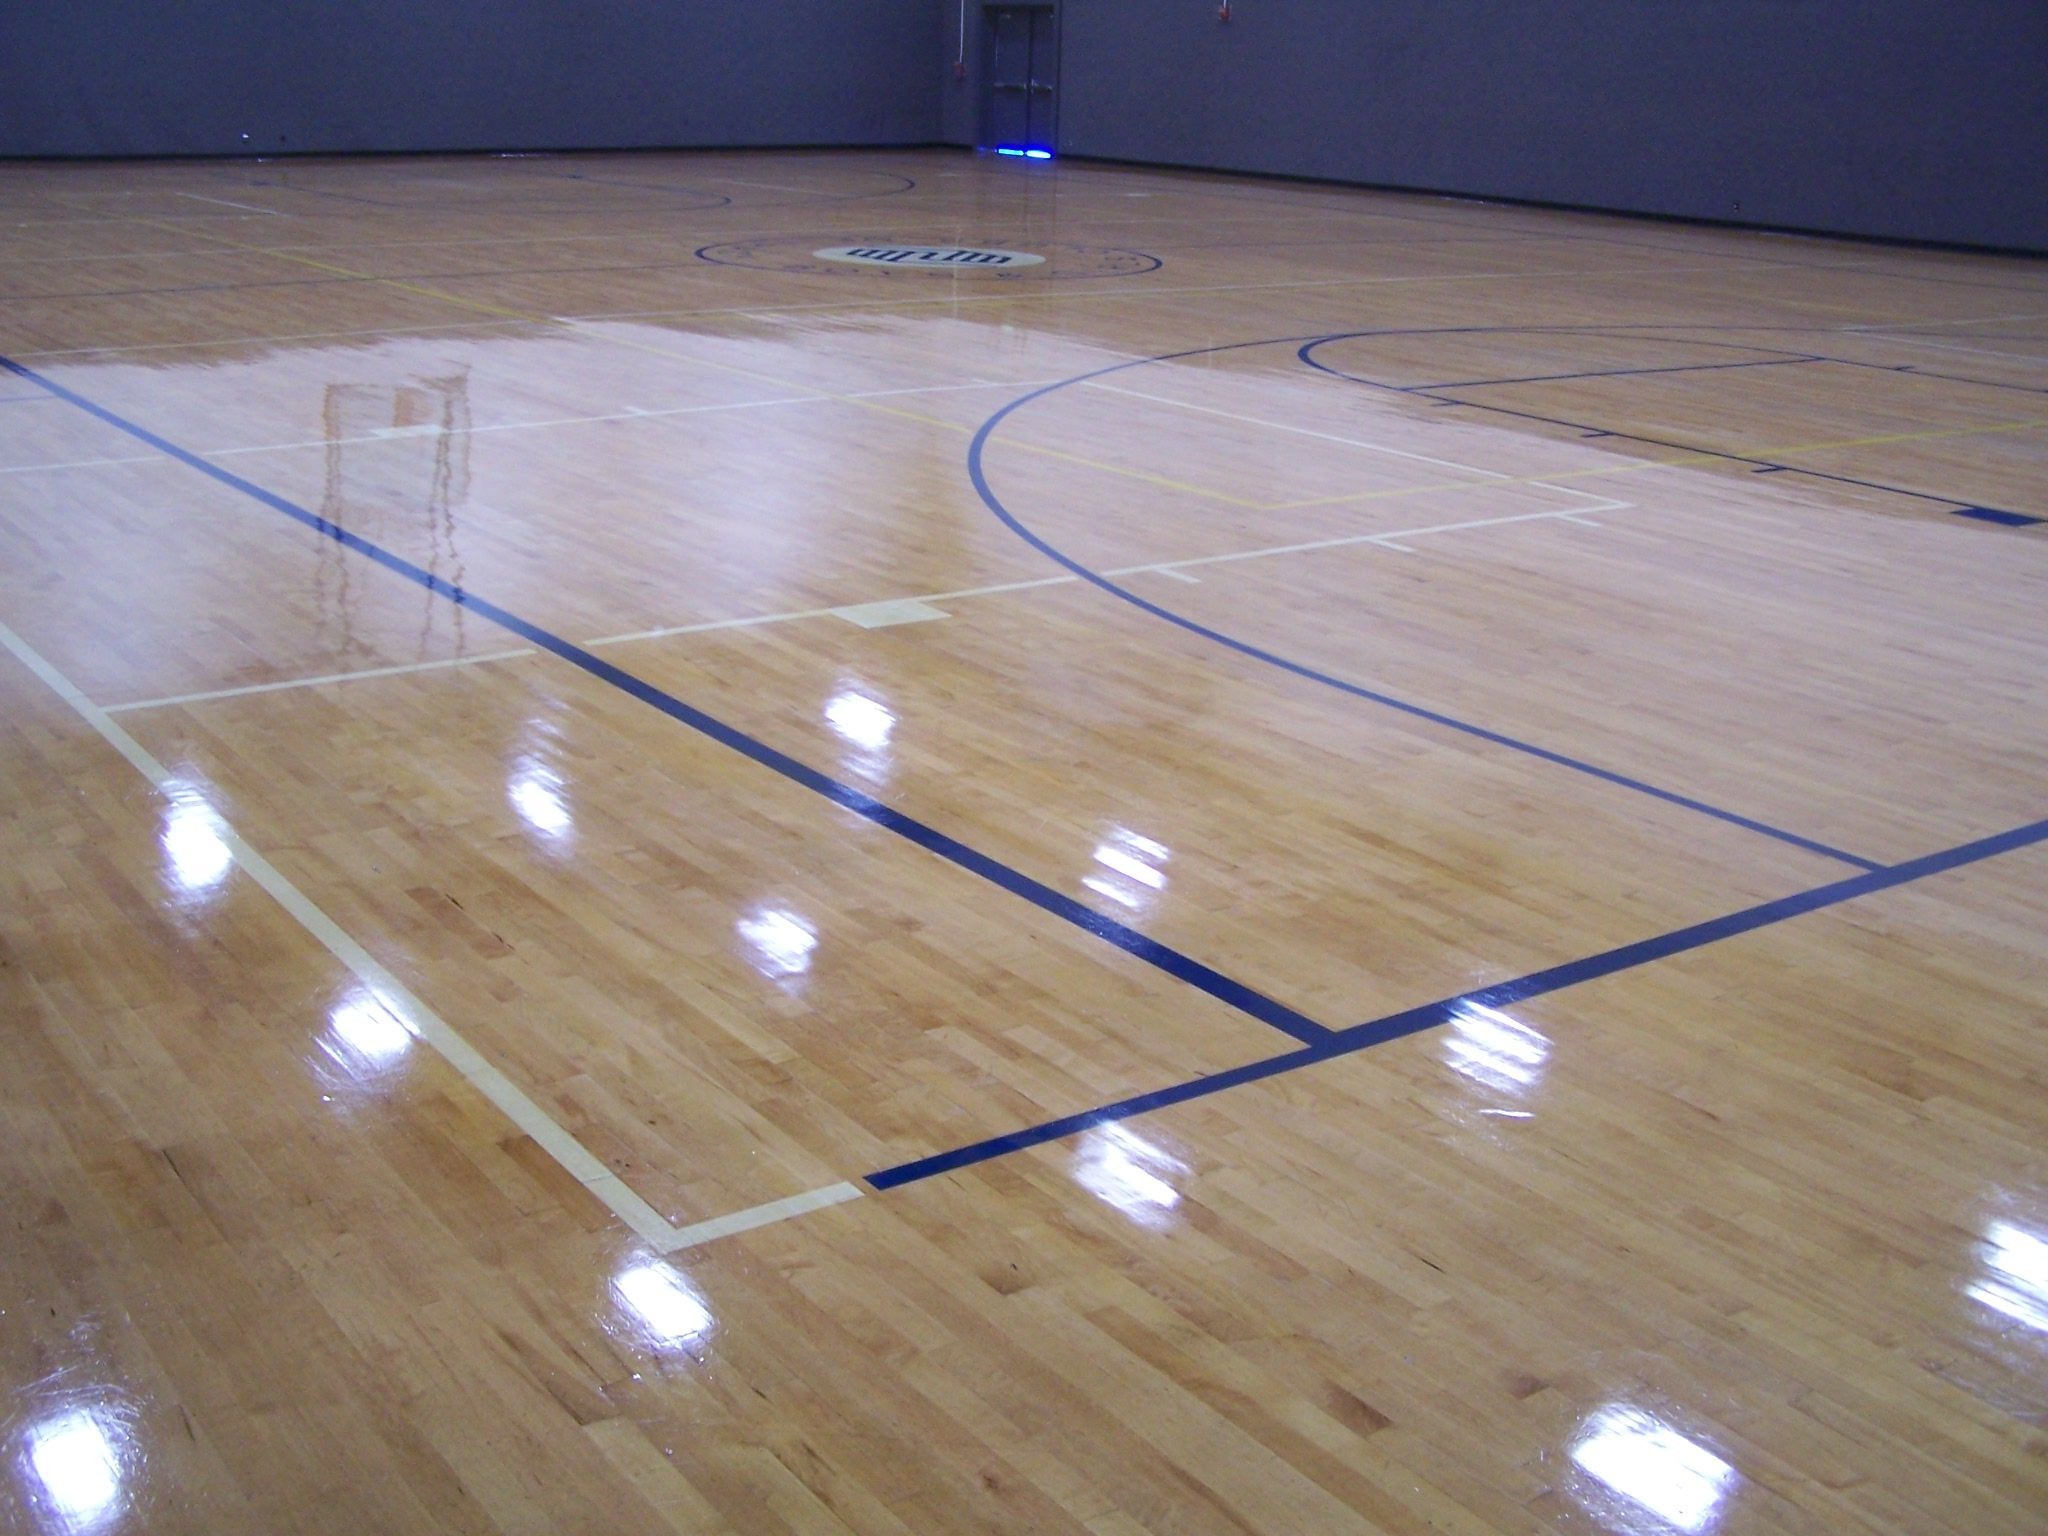 22 Awesome Hardwood Floor Restoration before and after 2024 free download hardwood floor restoration before and after of beautiful gym floor restoration made easy and long lasting with the inside beautiful gym floor restoration made easy and long lasting with the 